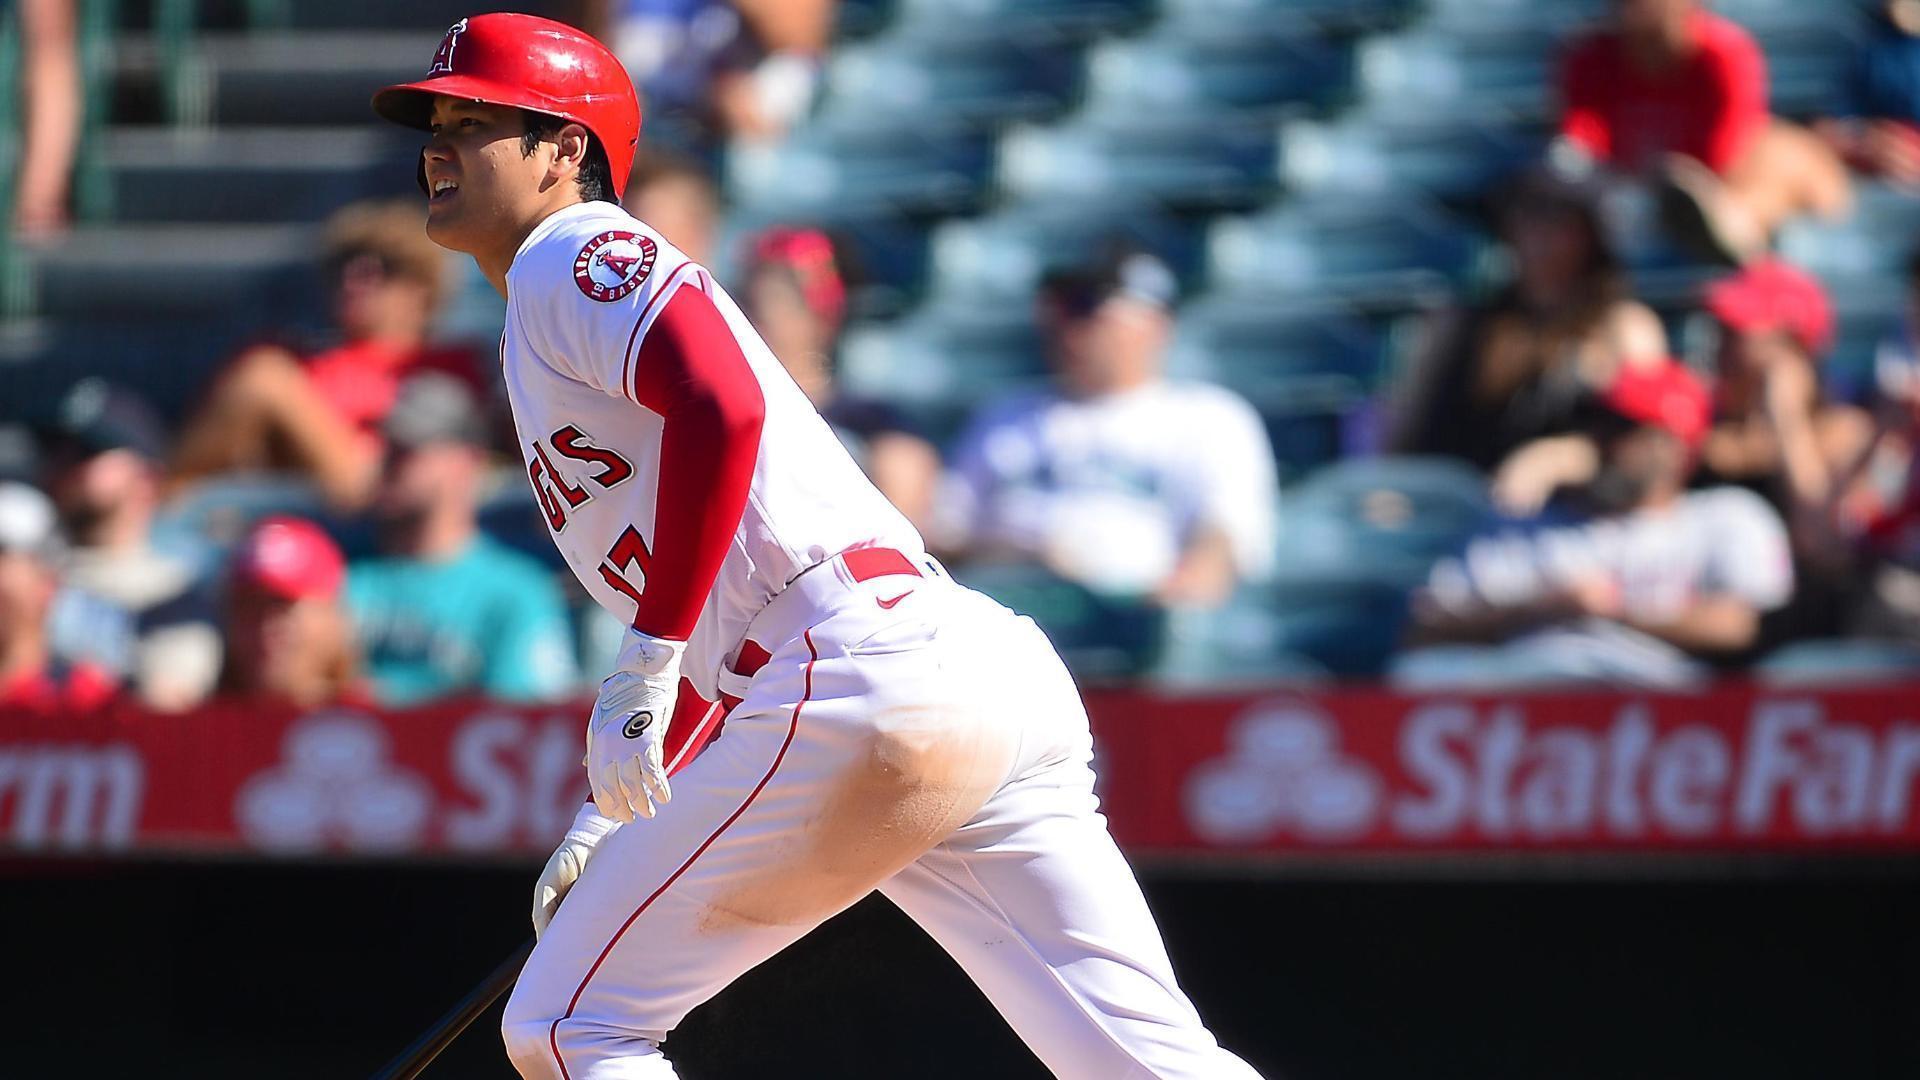 Shohei Ohtani of the Los Angeles Angels hit a solo home run in the third  inning of a baseball game against the Seattle Mariners on June 25, 2022, at  Angel Stadium in